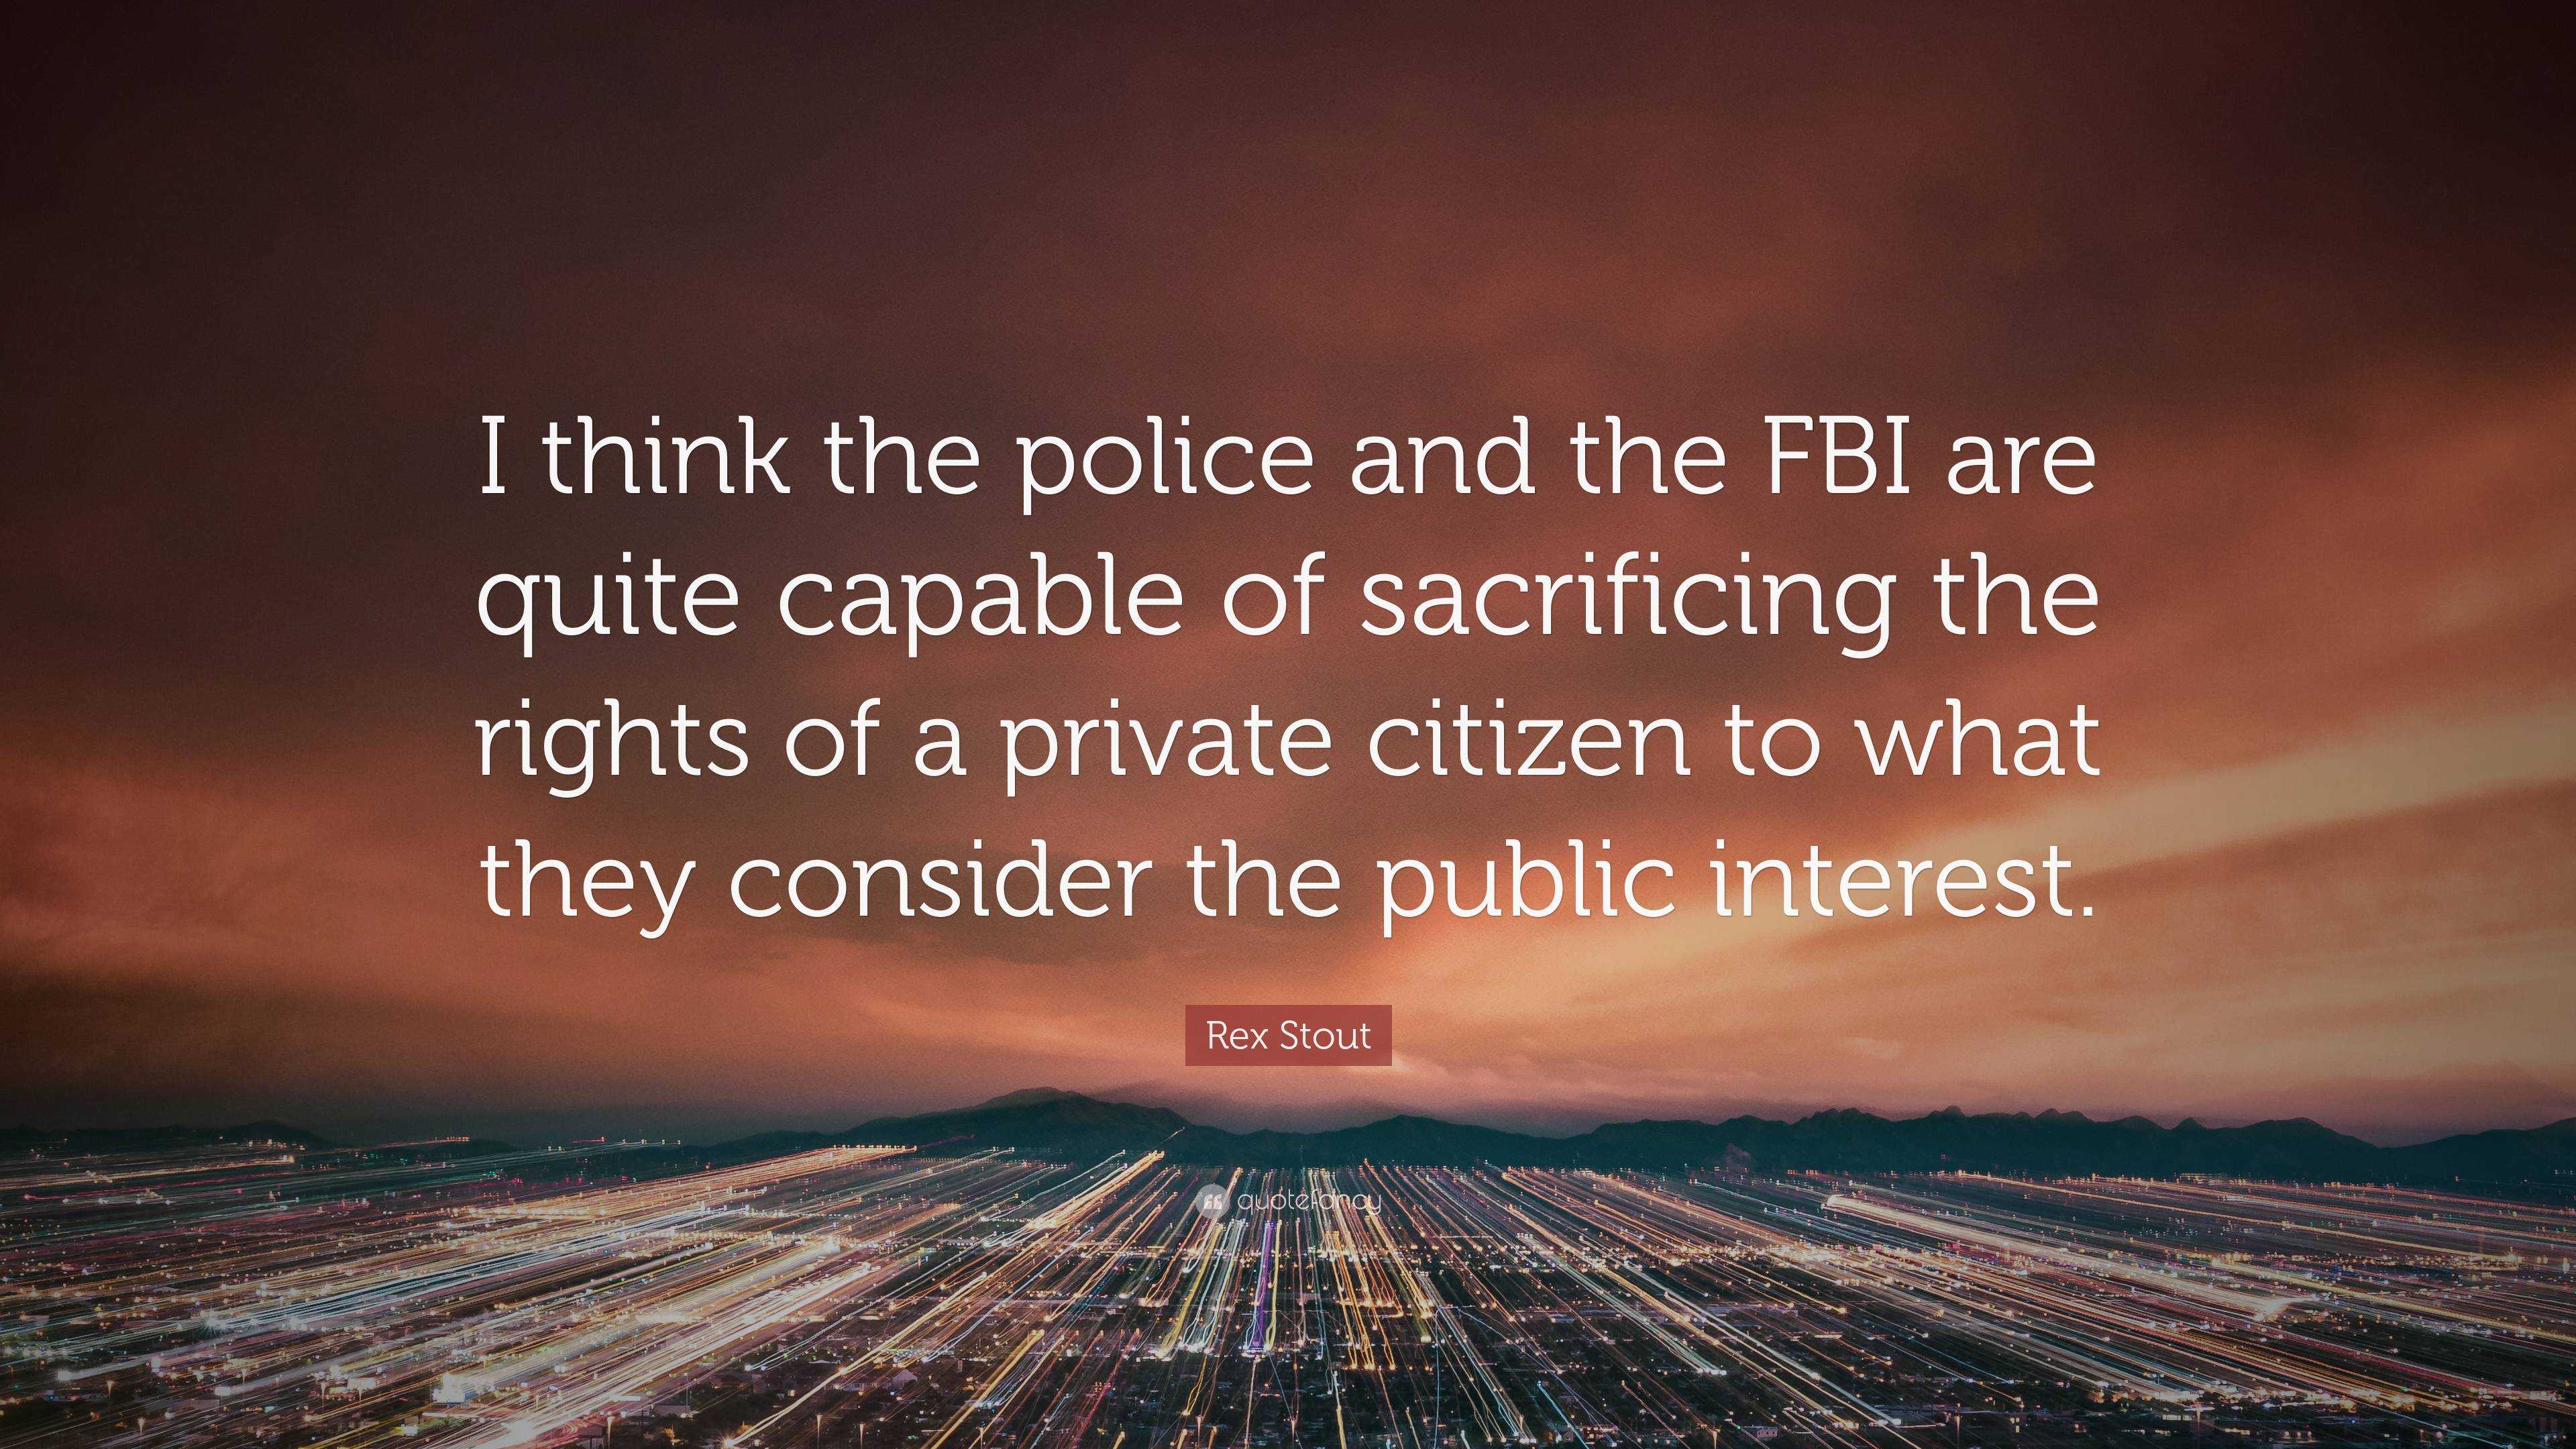 Rex Stout Quote: “I think the police and the FBI are quite capable of  sacrificing the rights of a private citizen to what they consider th...”